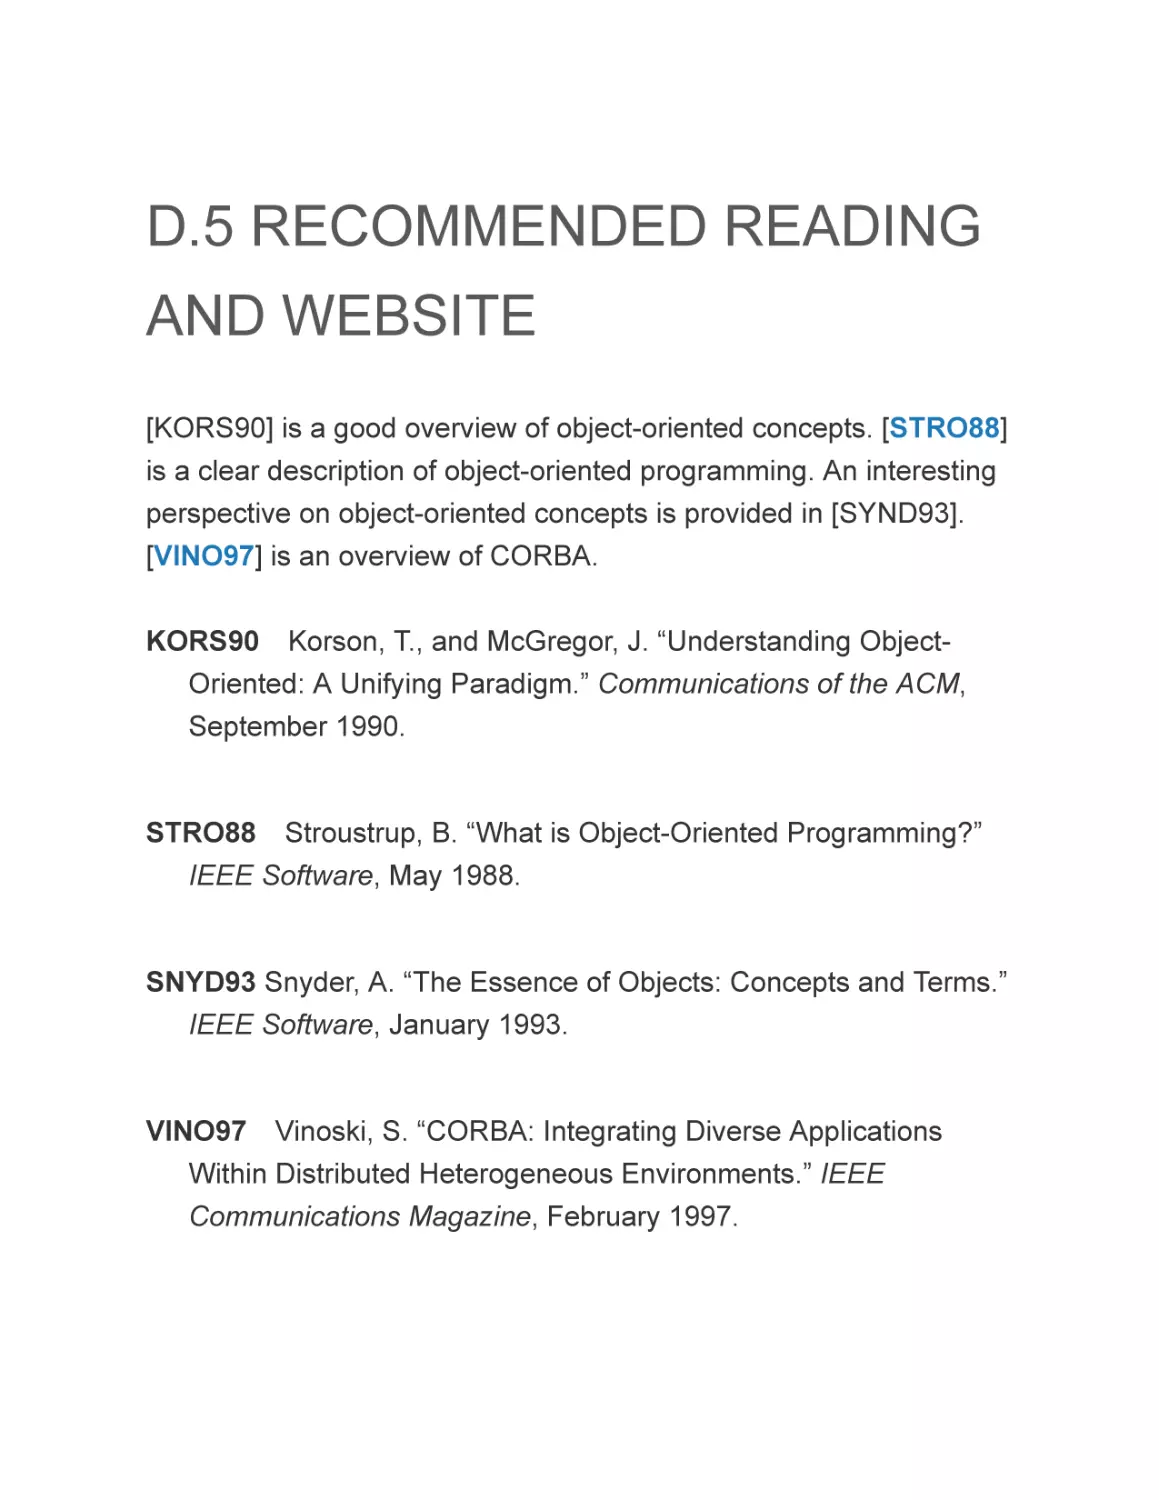 D.5 RECOMMENDED READING AND WEBSITE